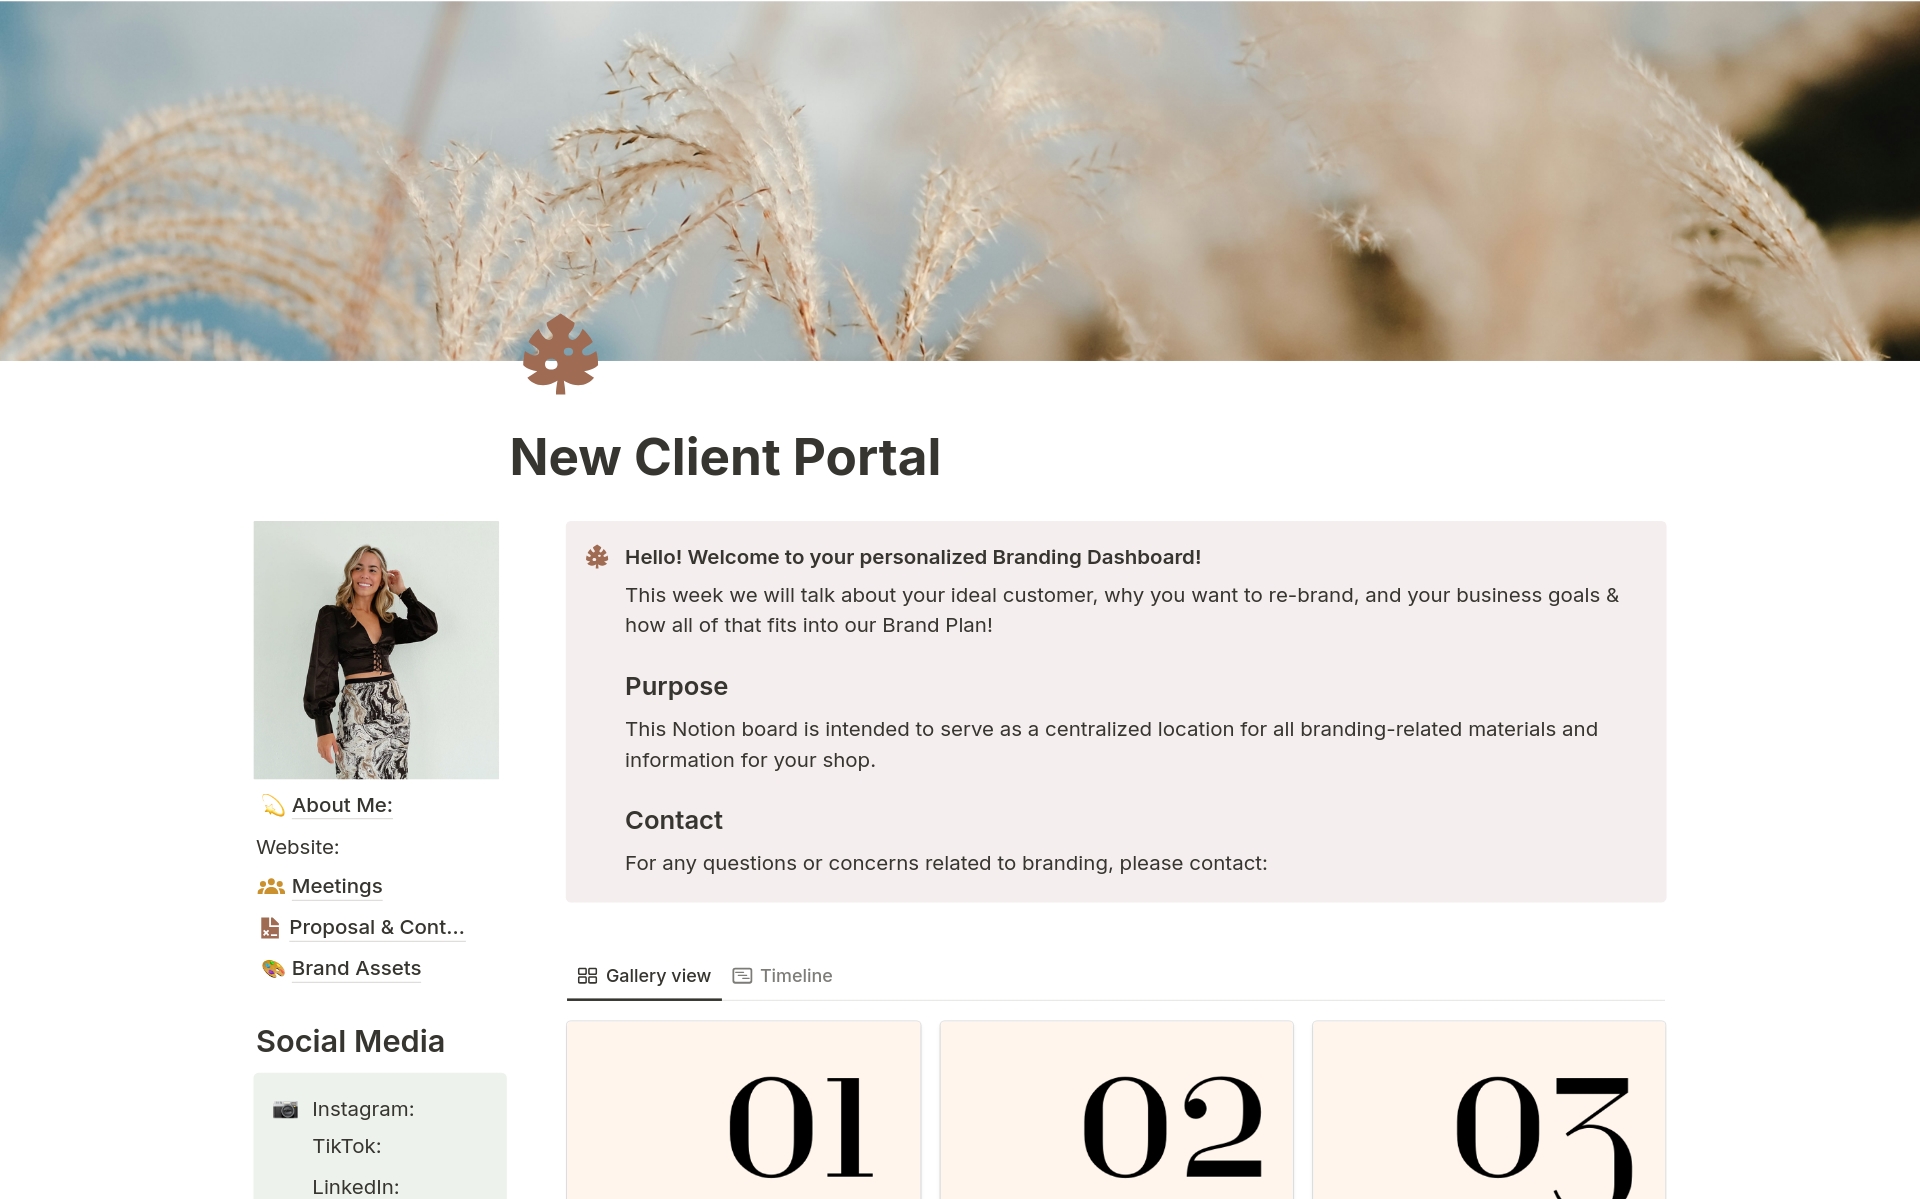 A client portal for delivering brand guidelines, website redesigns or social media management for small e-businesses.